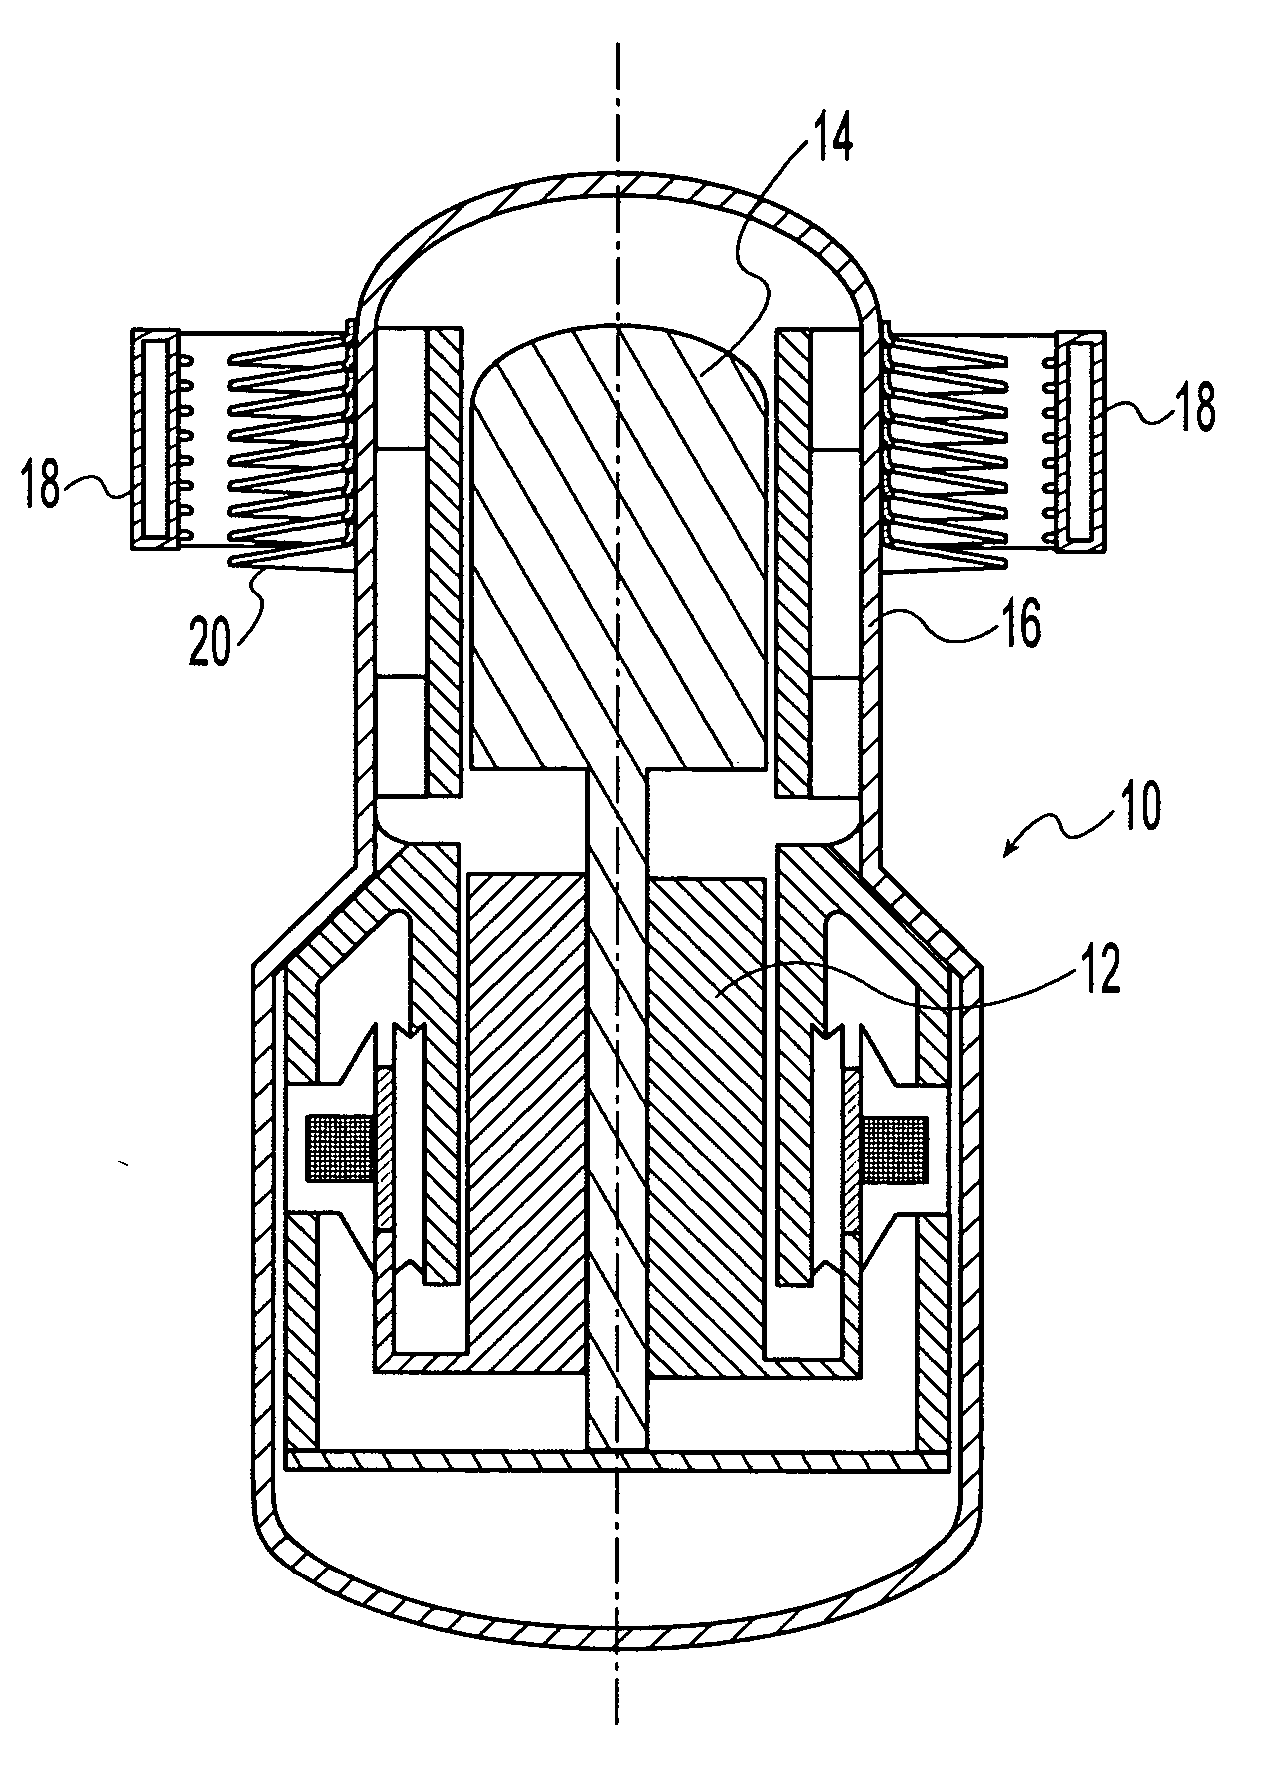 Heat exchanger fins and method for fabricating fins particularly suitable for stirling engines